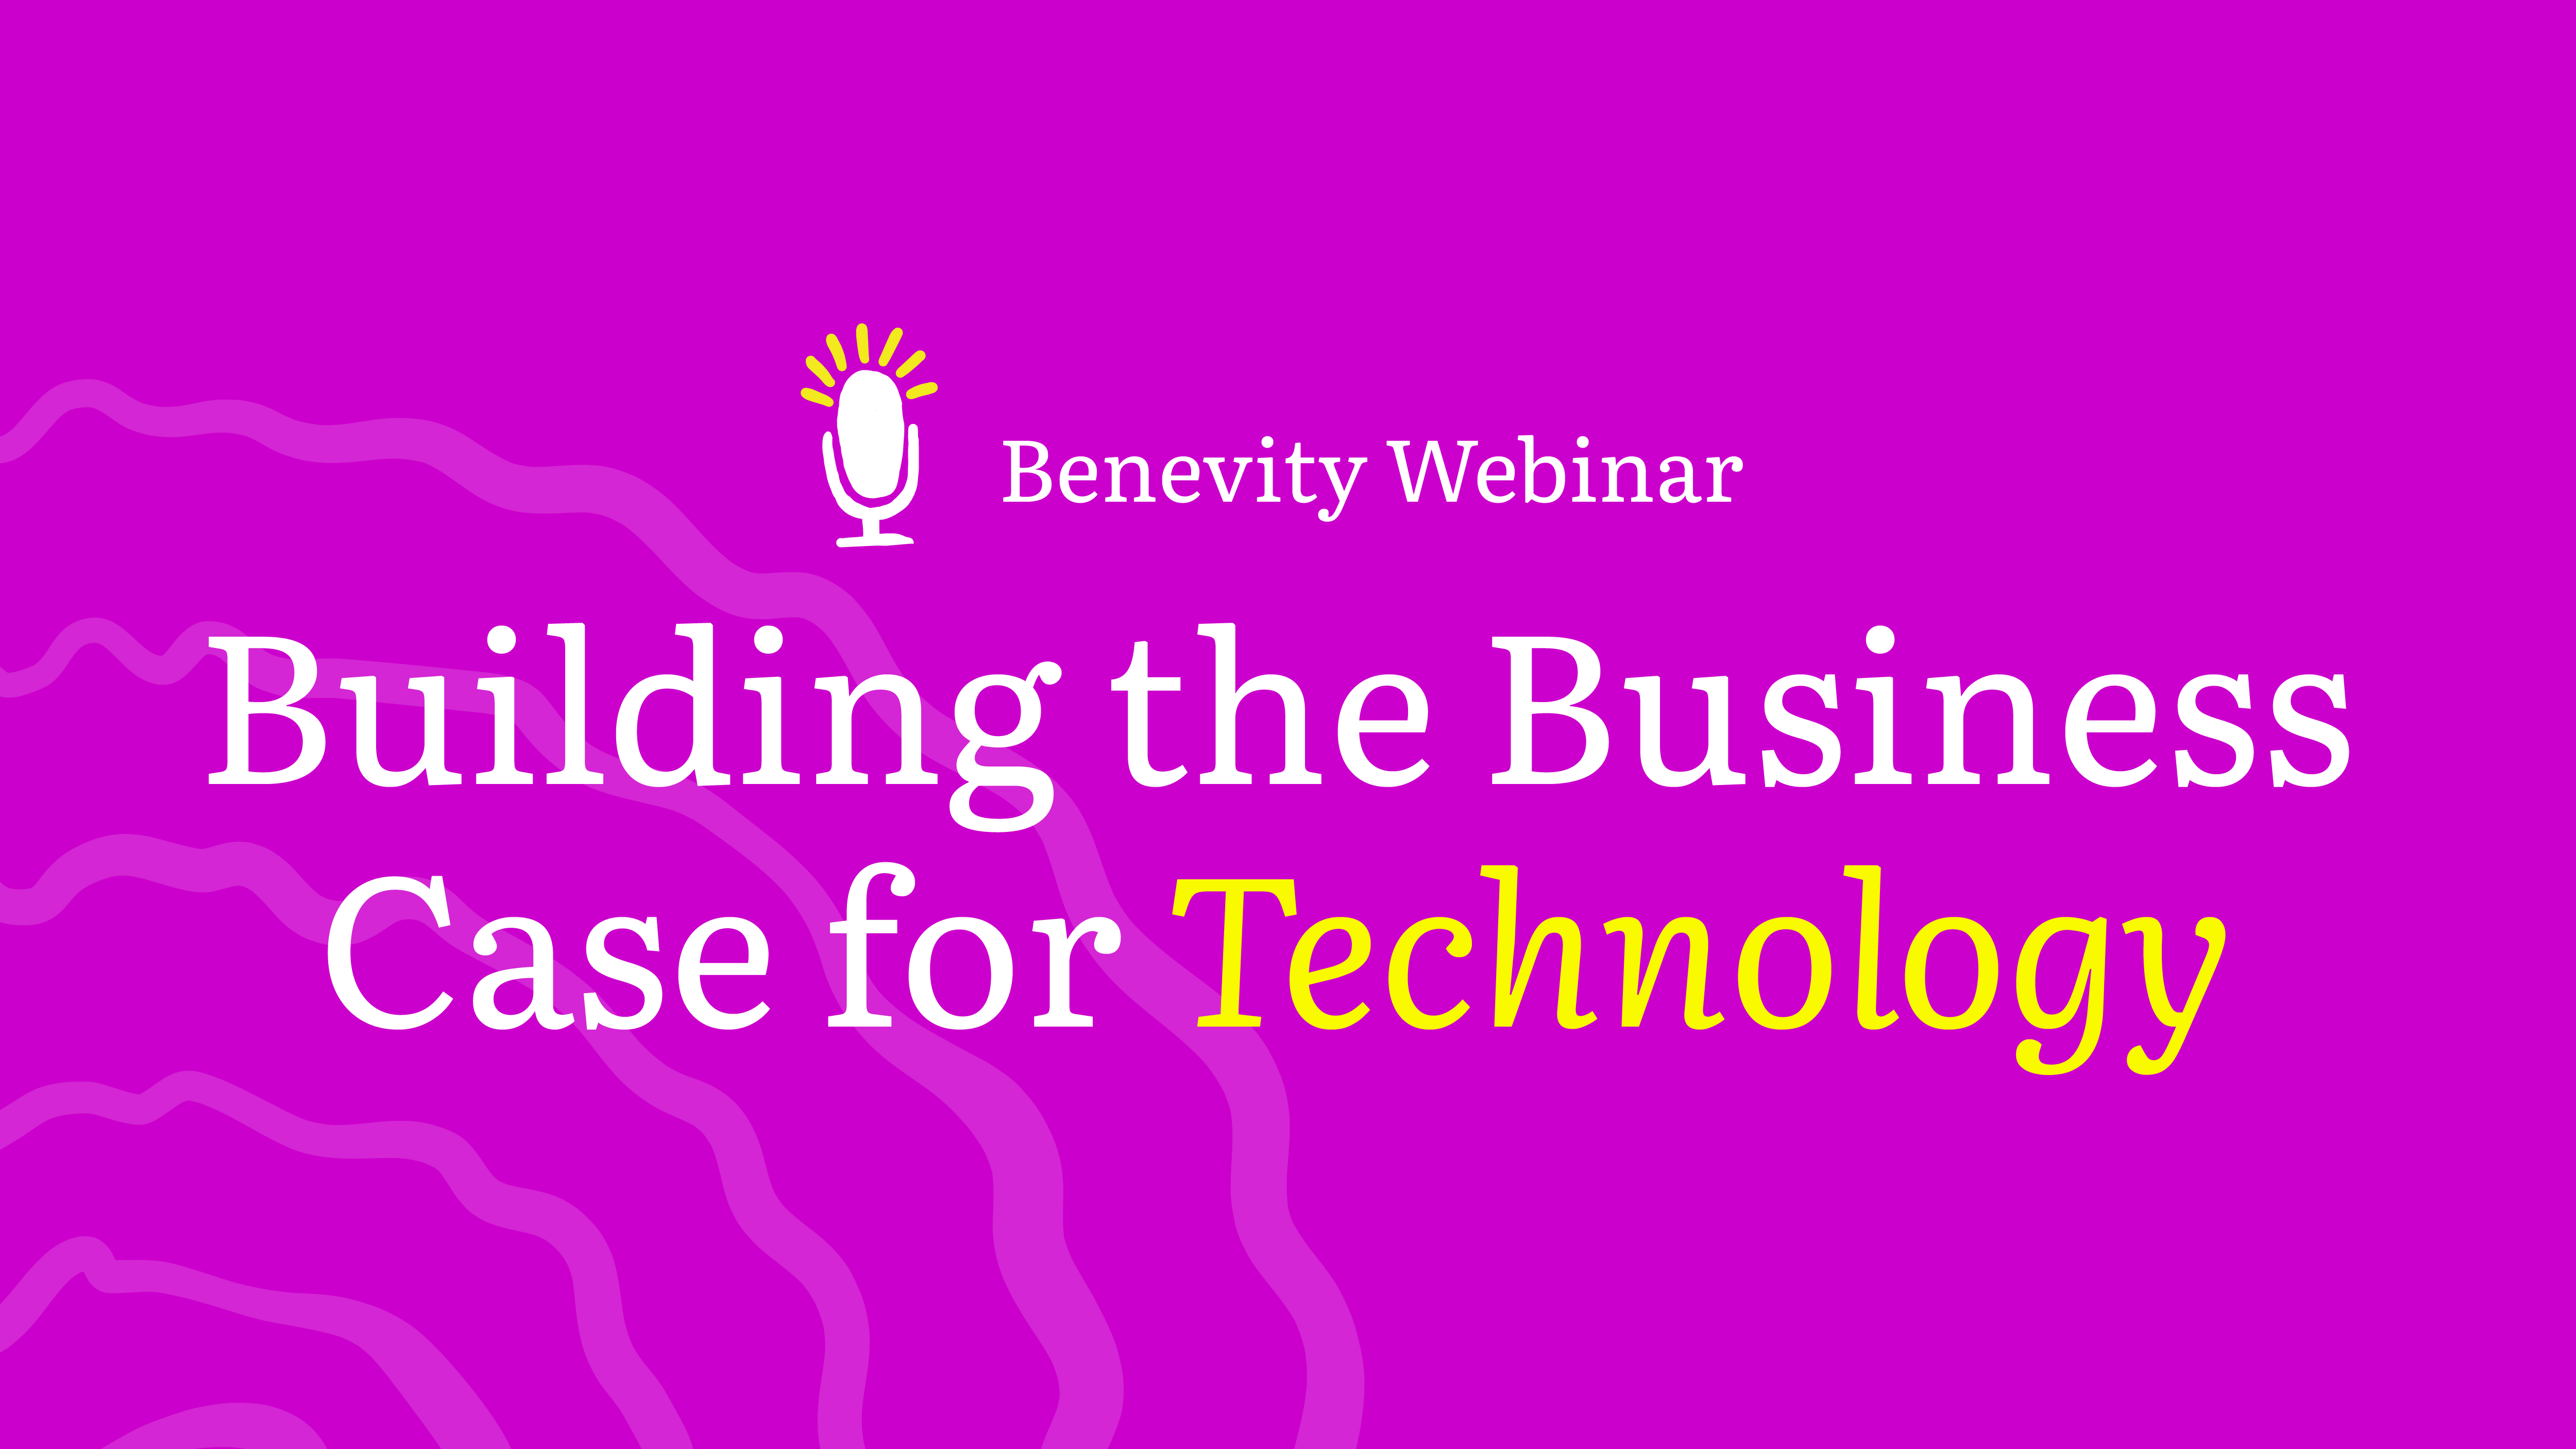 Building the Business Case for Technology